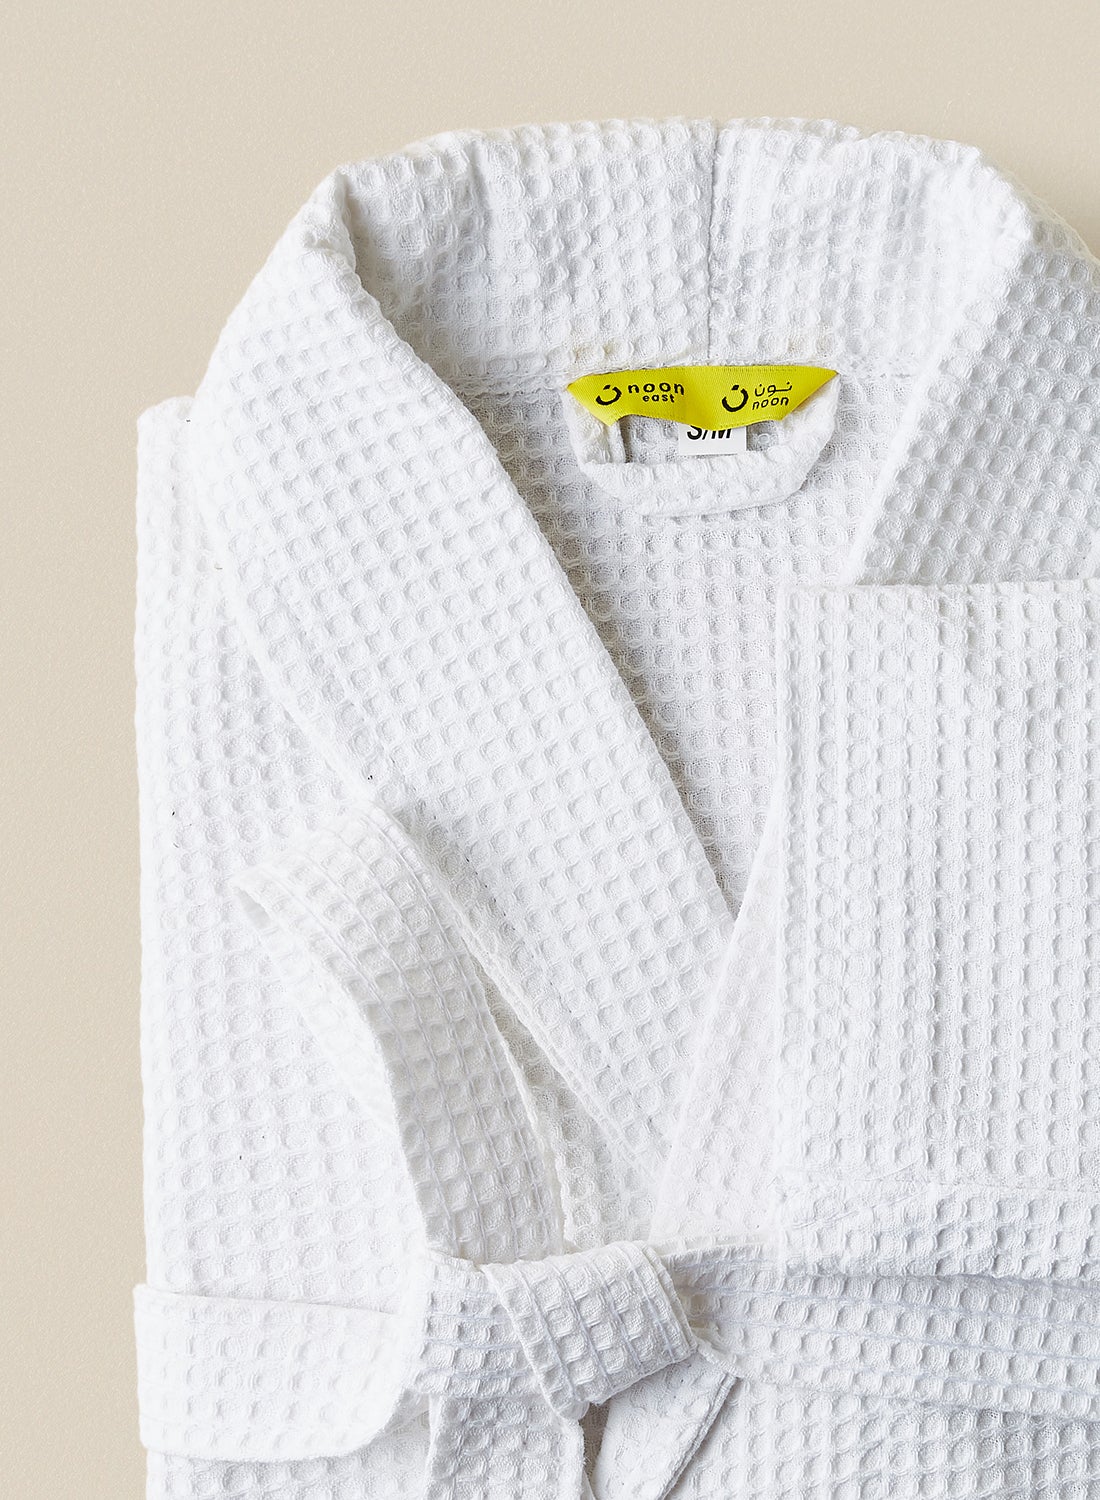 Bathrobe - 280 GSM 100% Cotton Waffle Quick Dry And Lightweight - Shawl Collar & Pocket - White Color - 1 Piece 